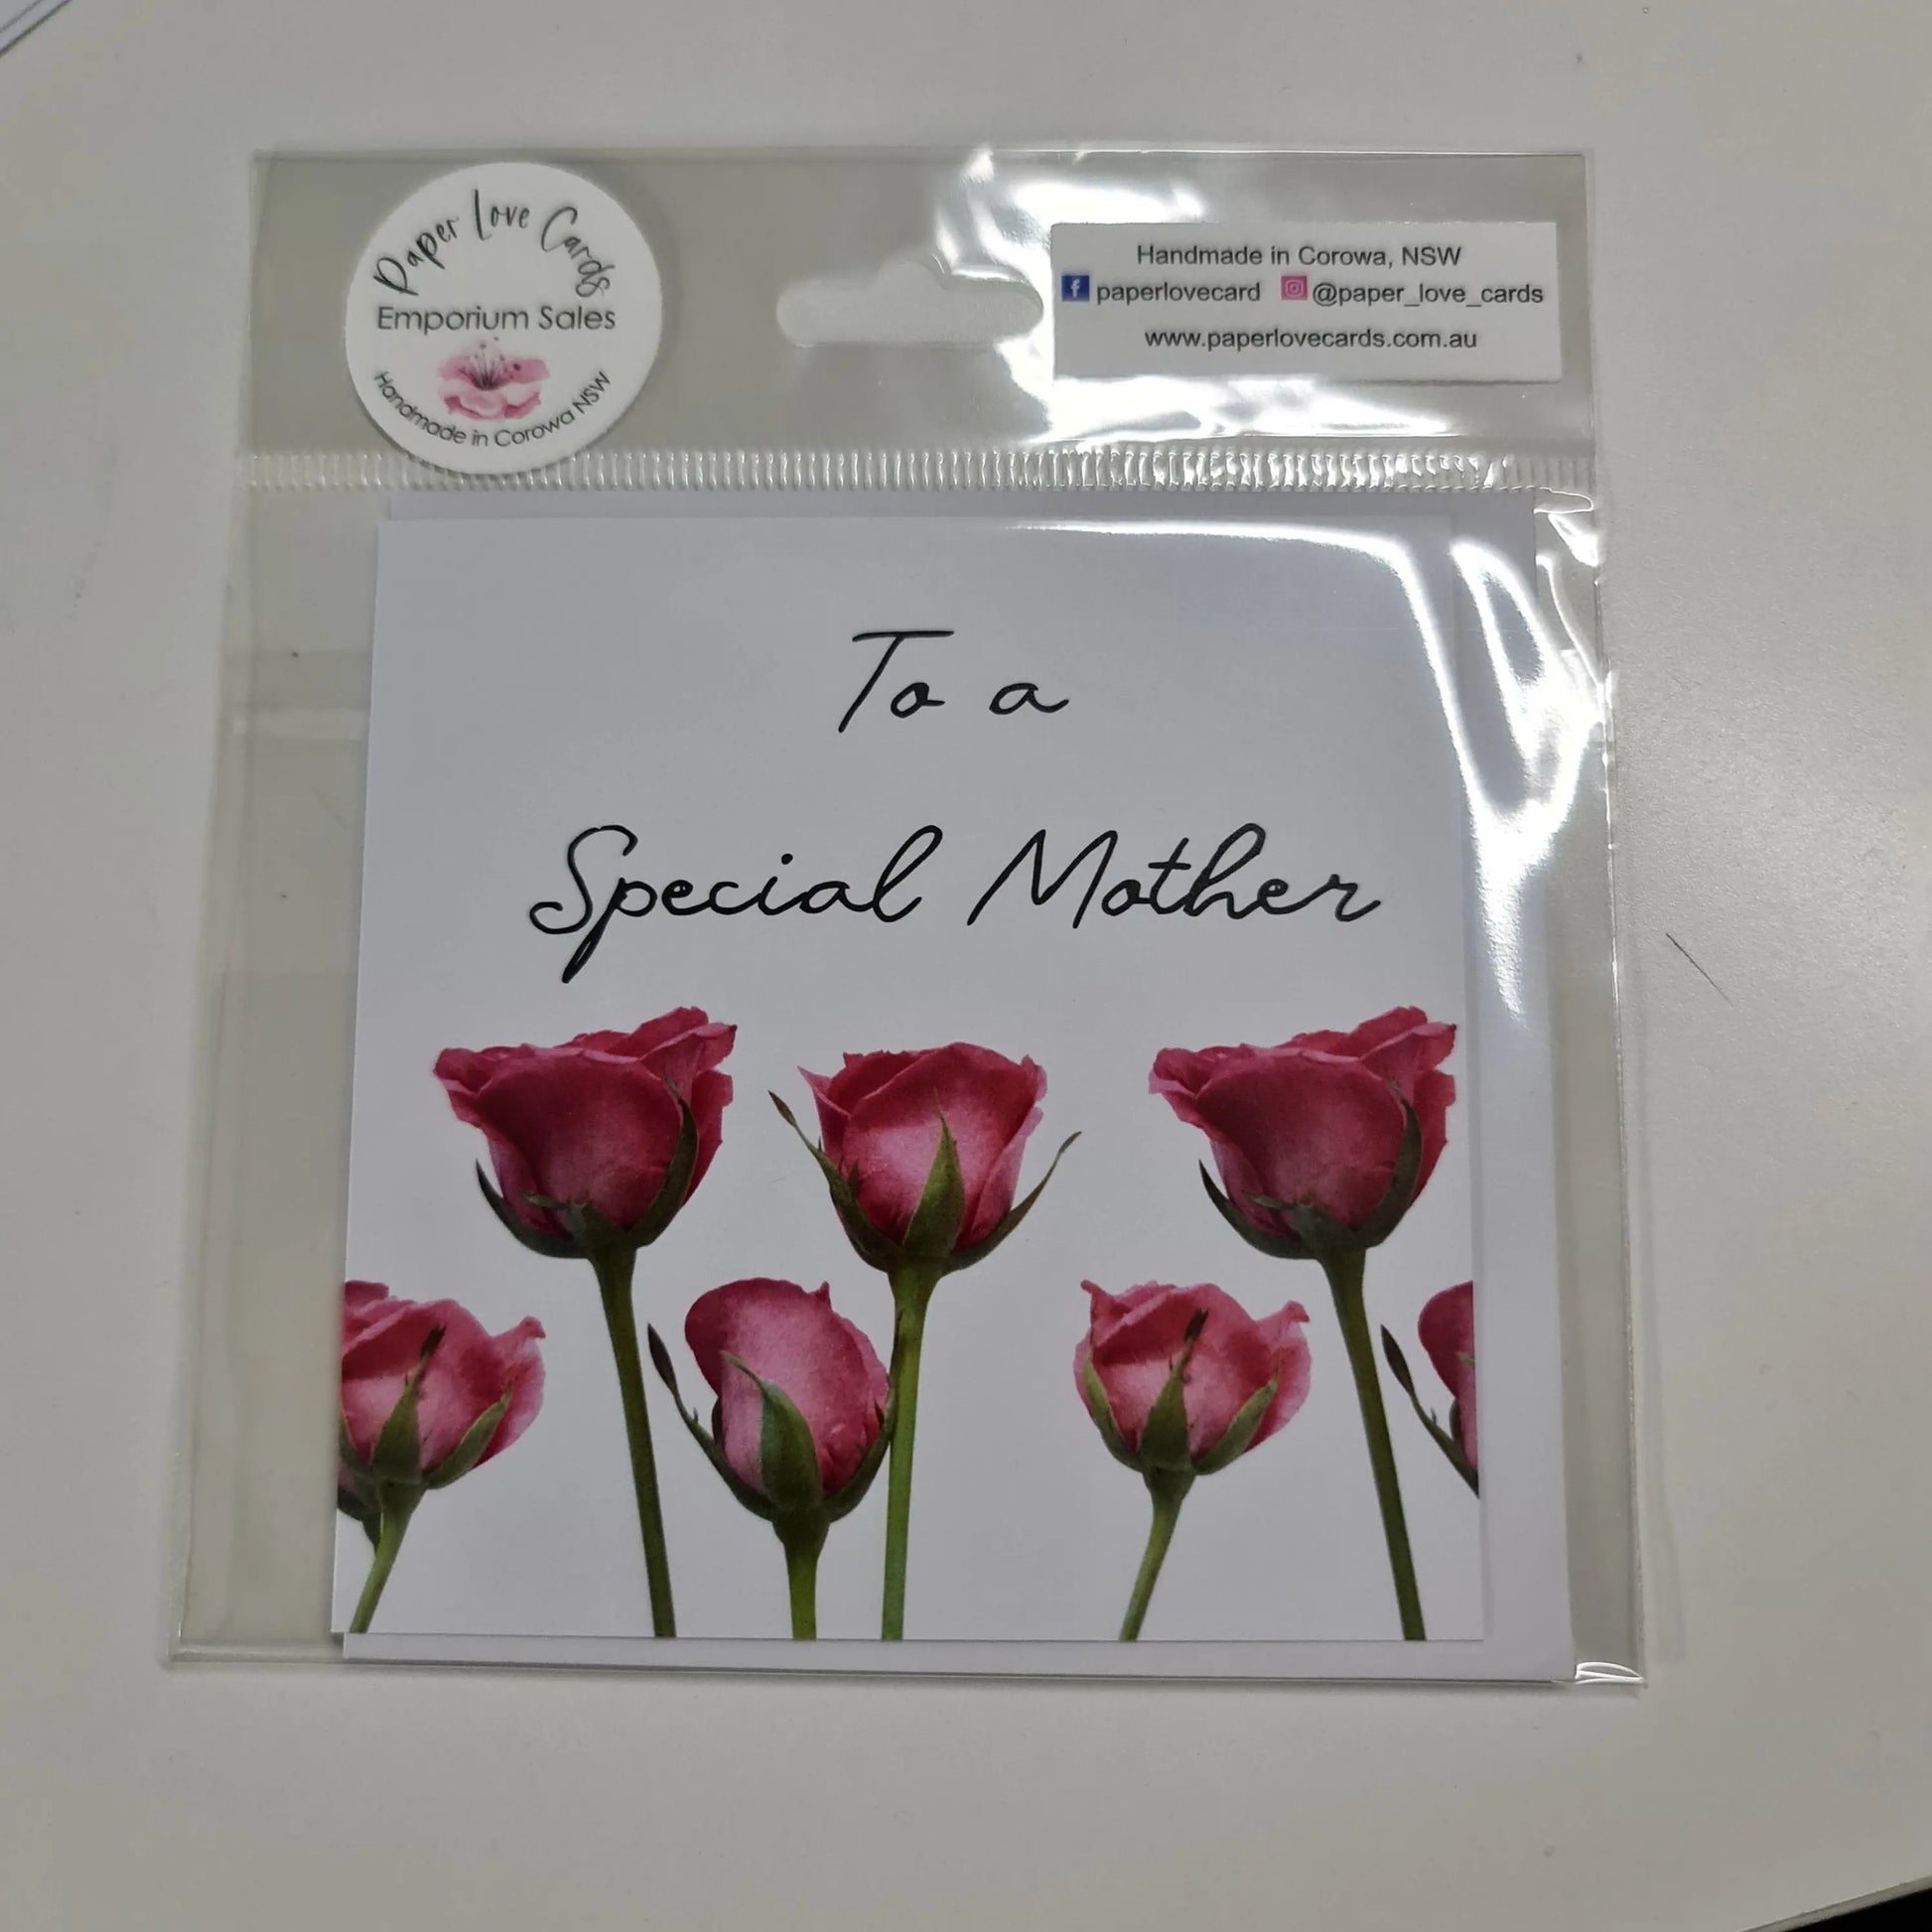 To a Special Mother - Pink Roses Paper Love Cards